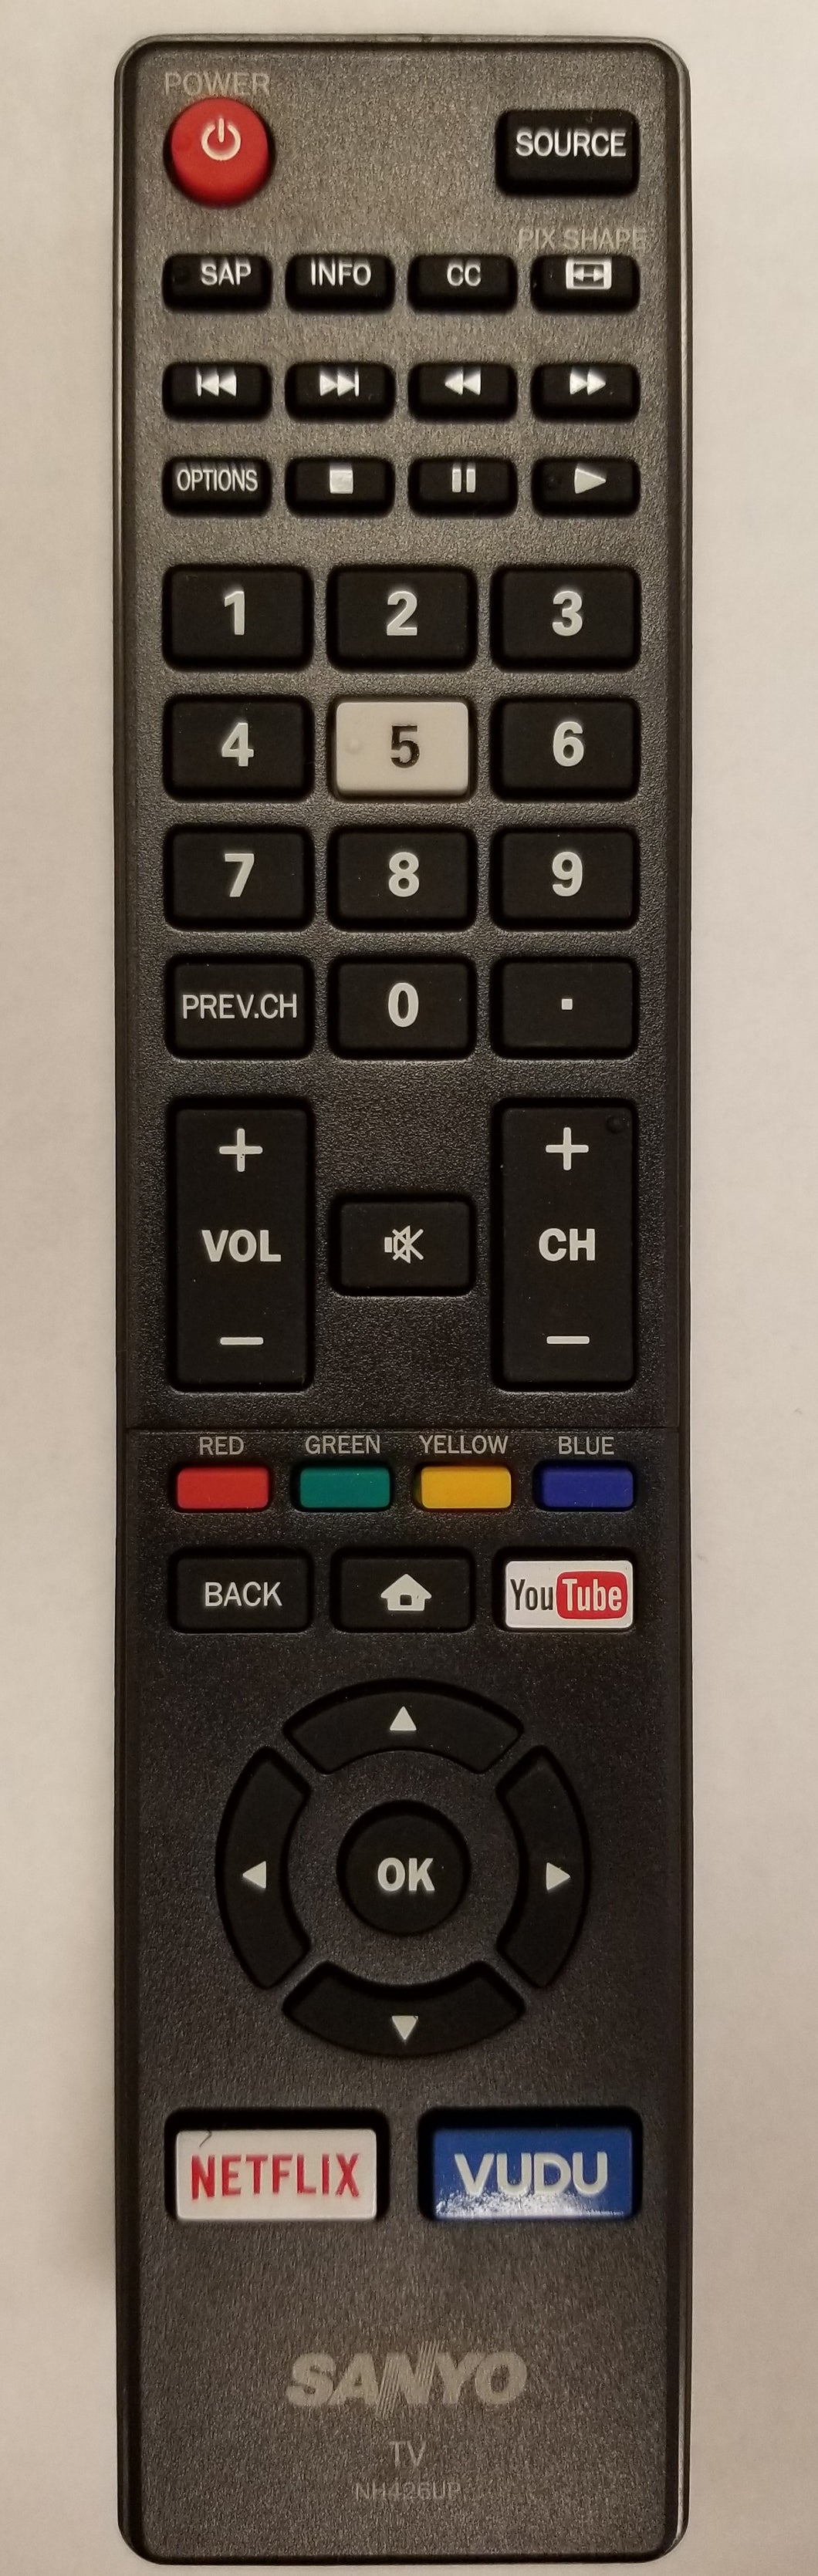 OEM replacement remote control for Sanyo LED/LCD TV NH426UP